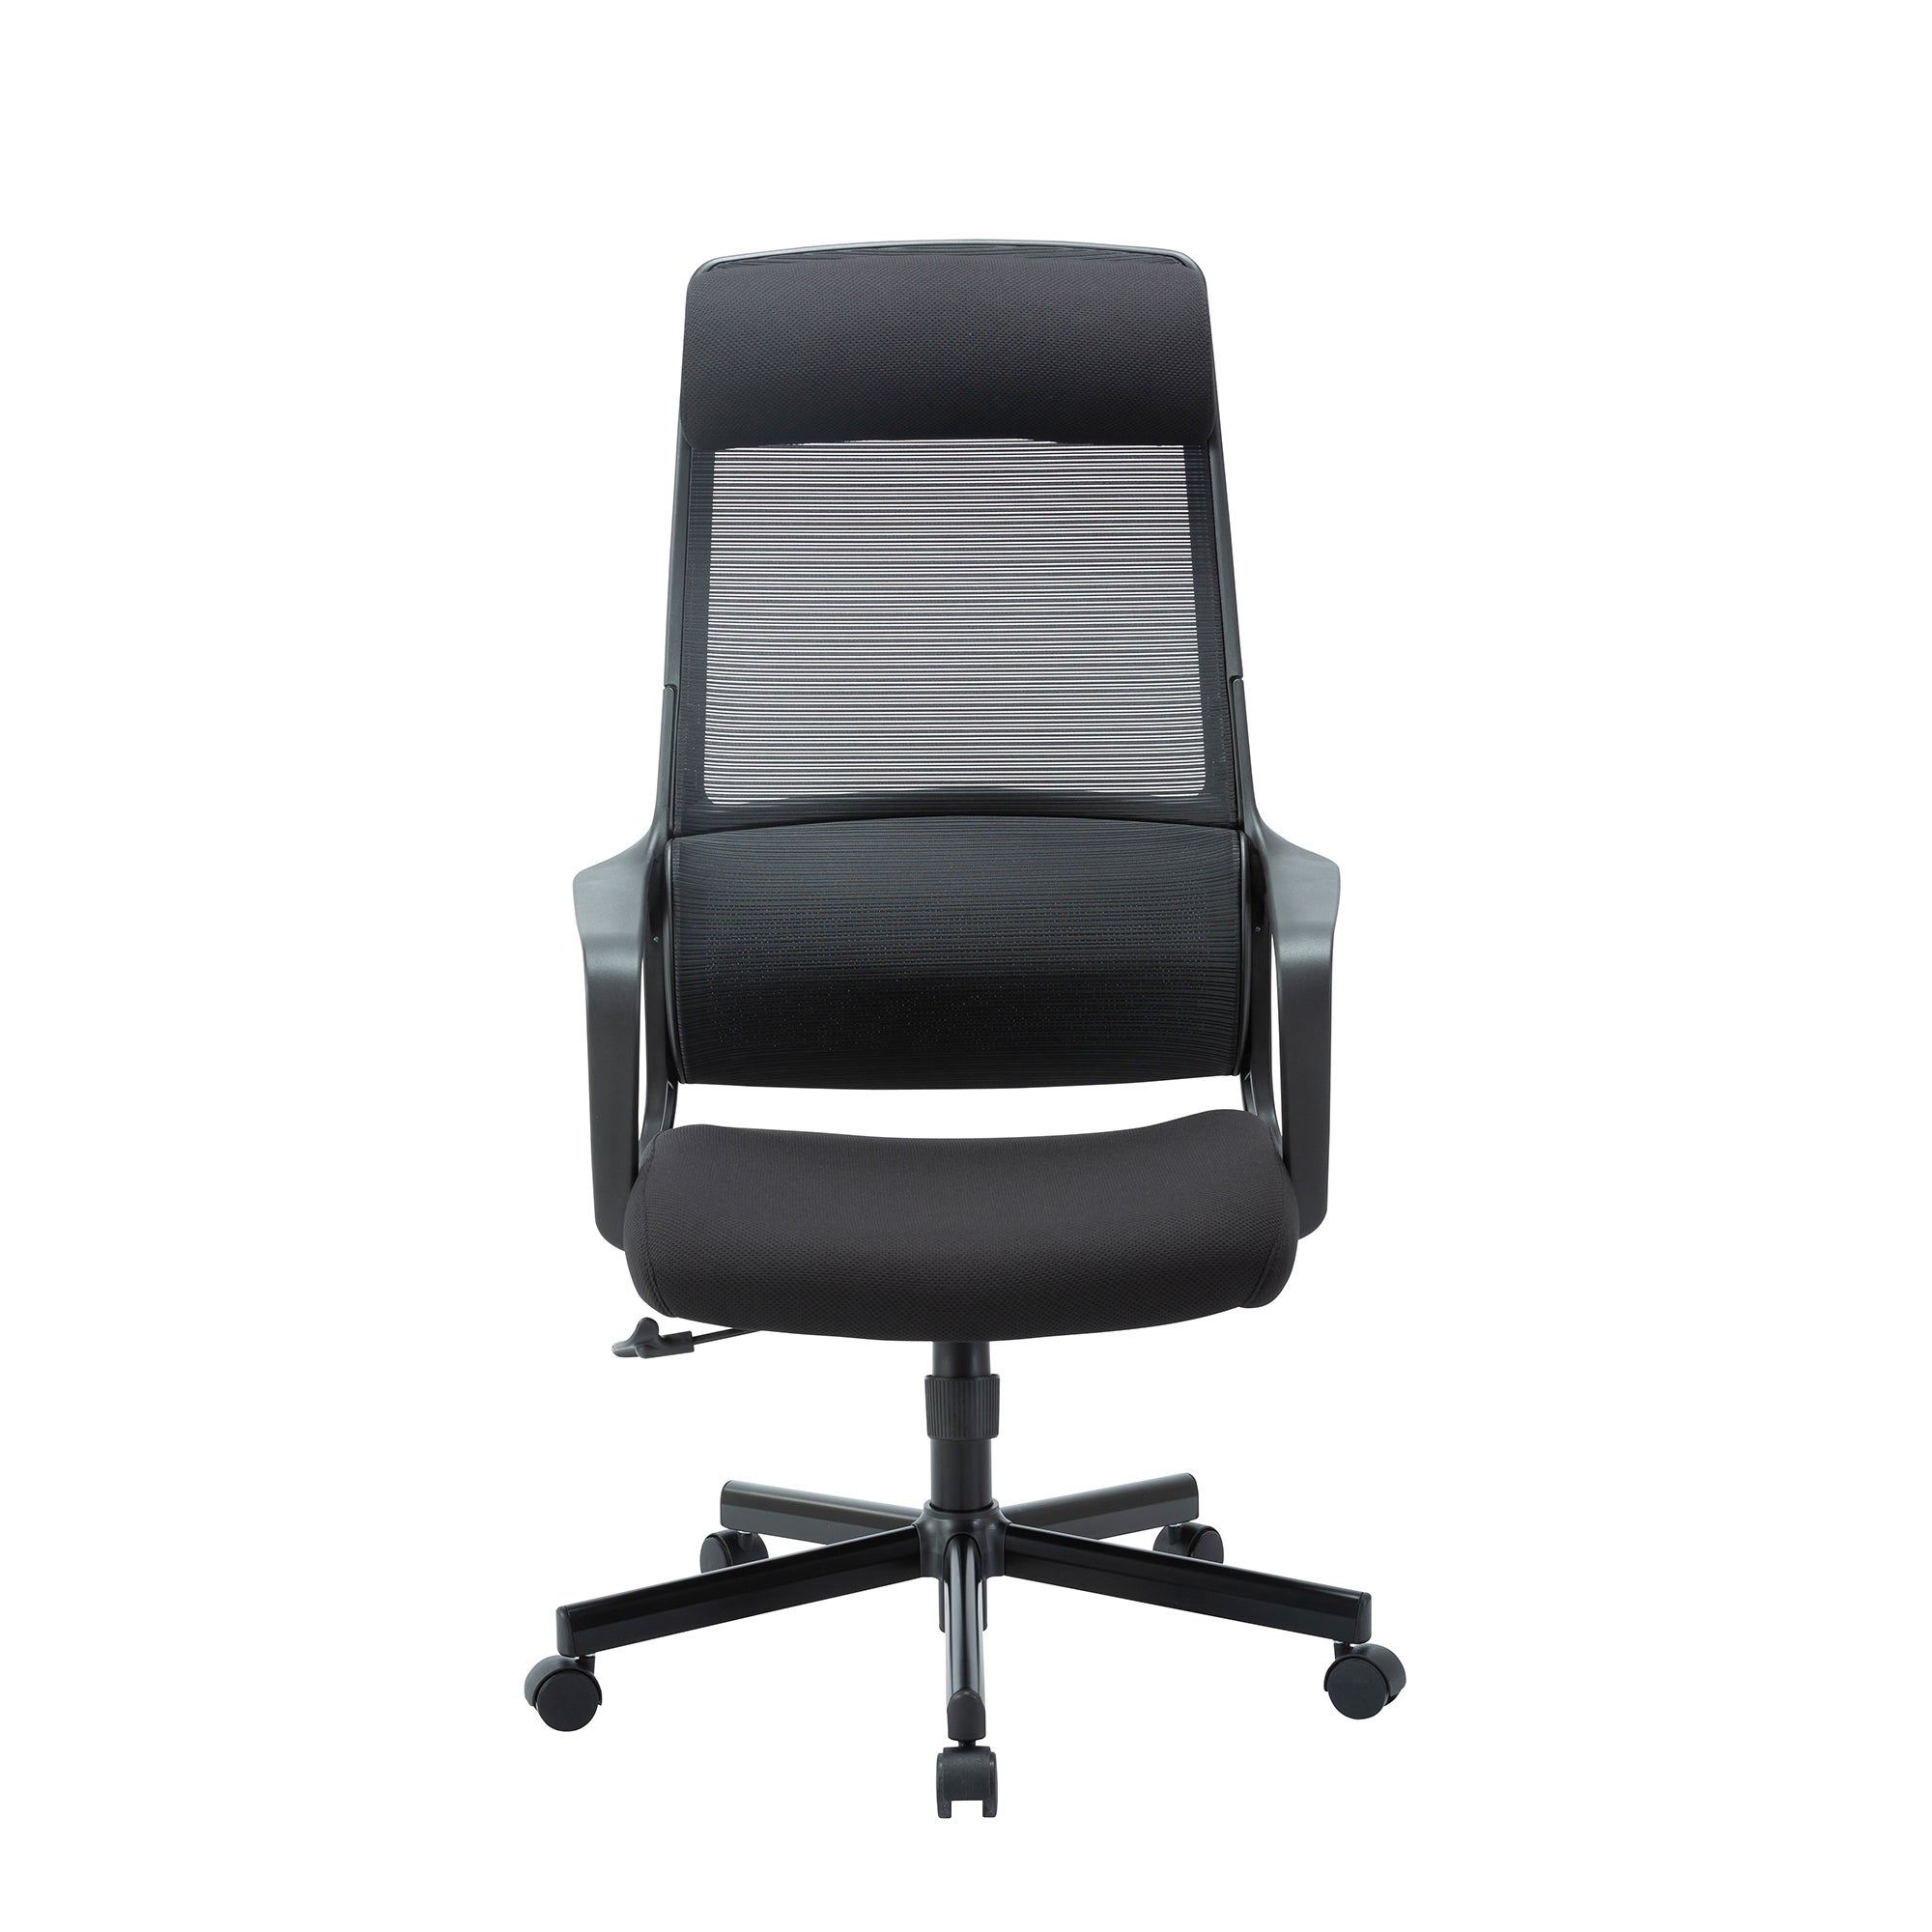 High Back Office Task Chair In Black